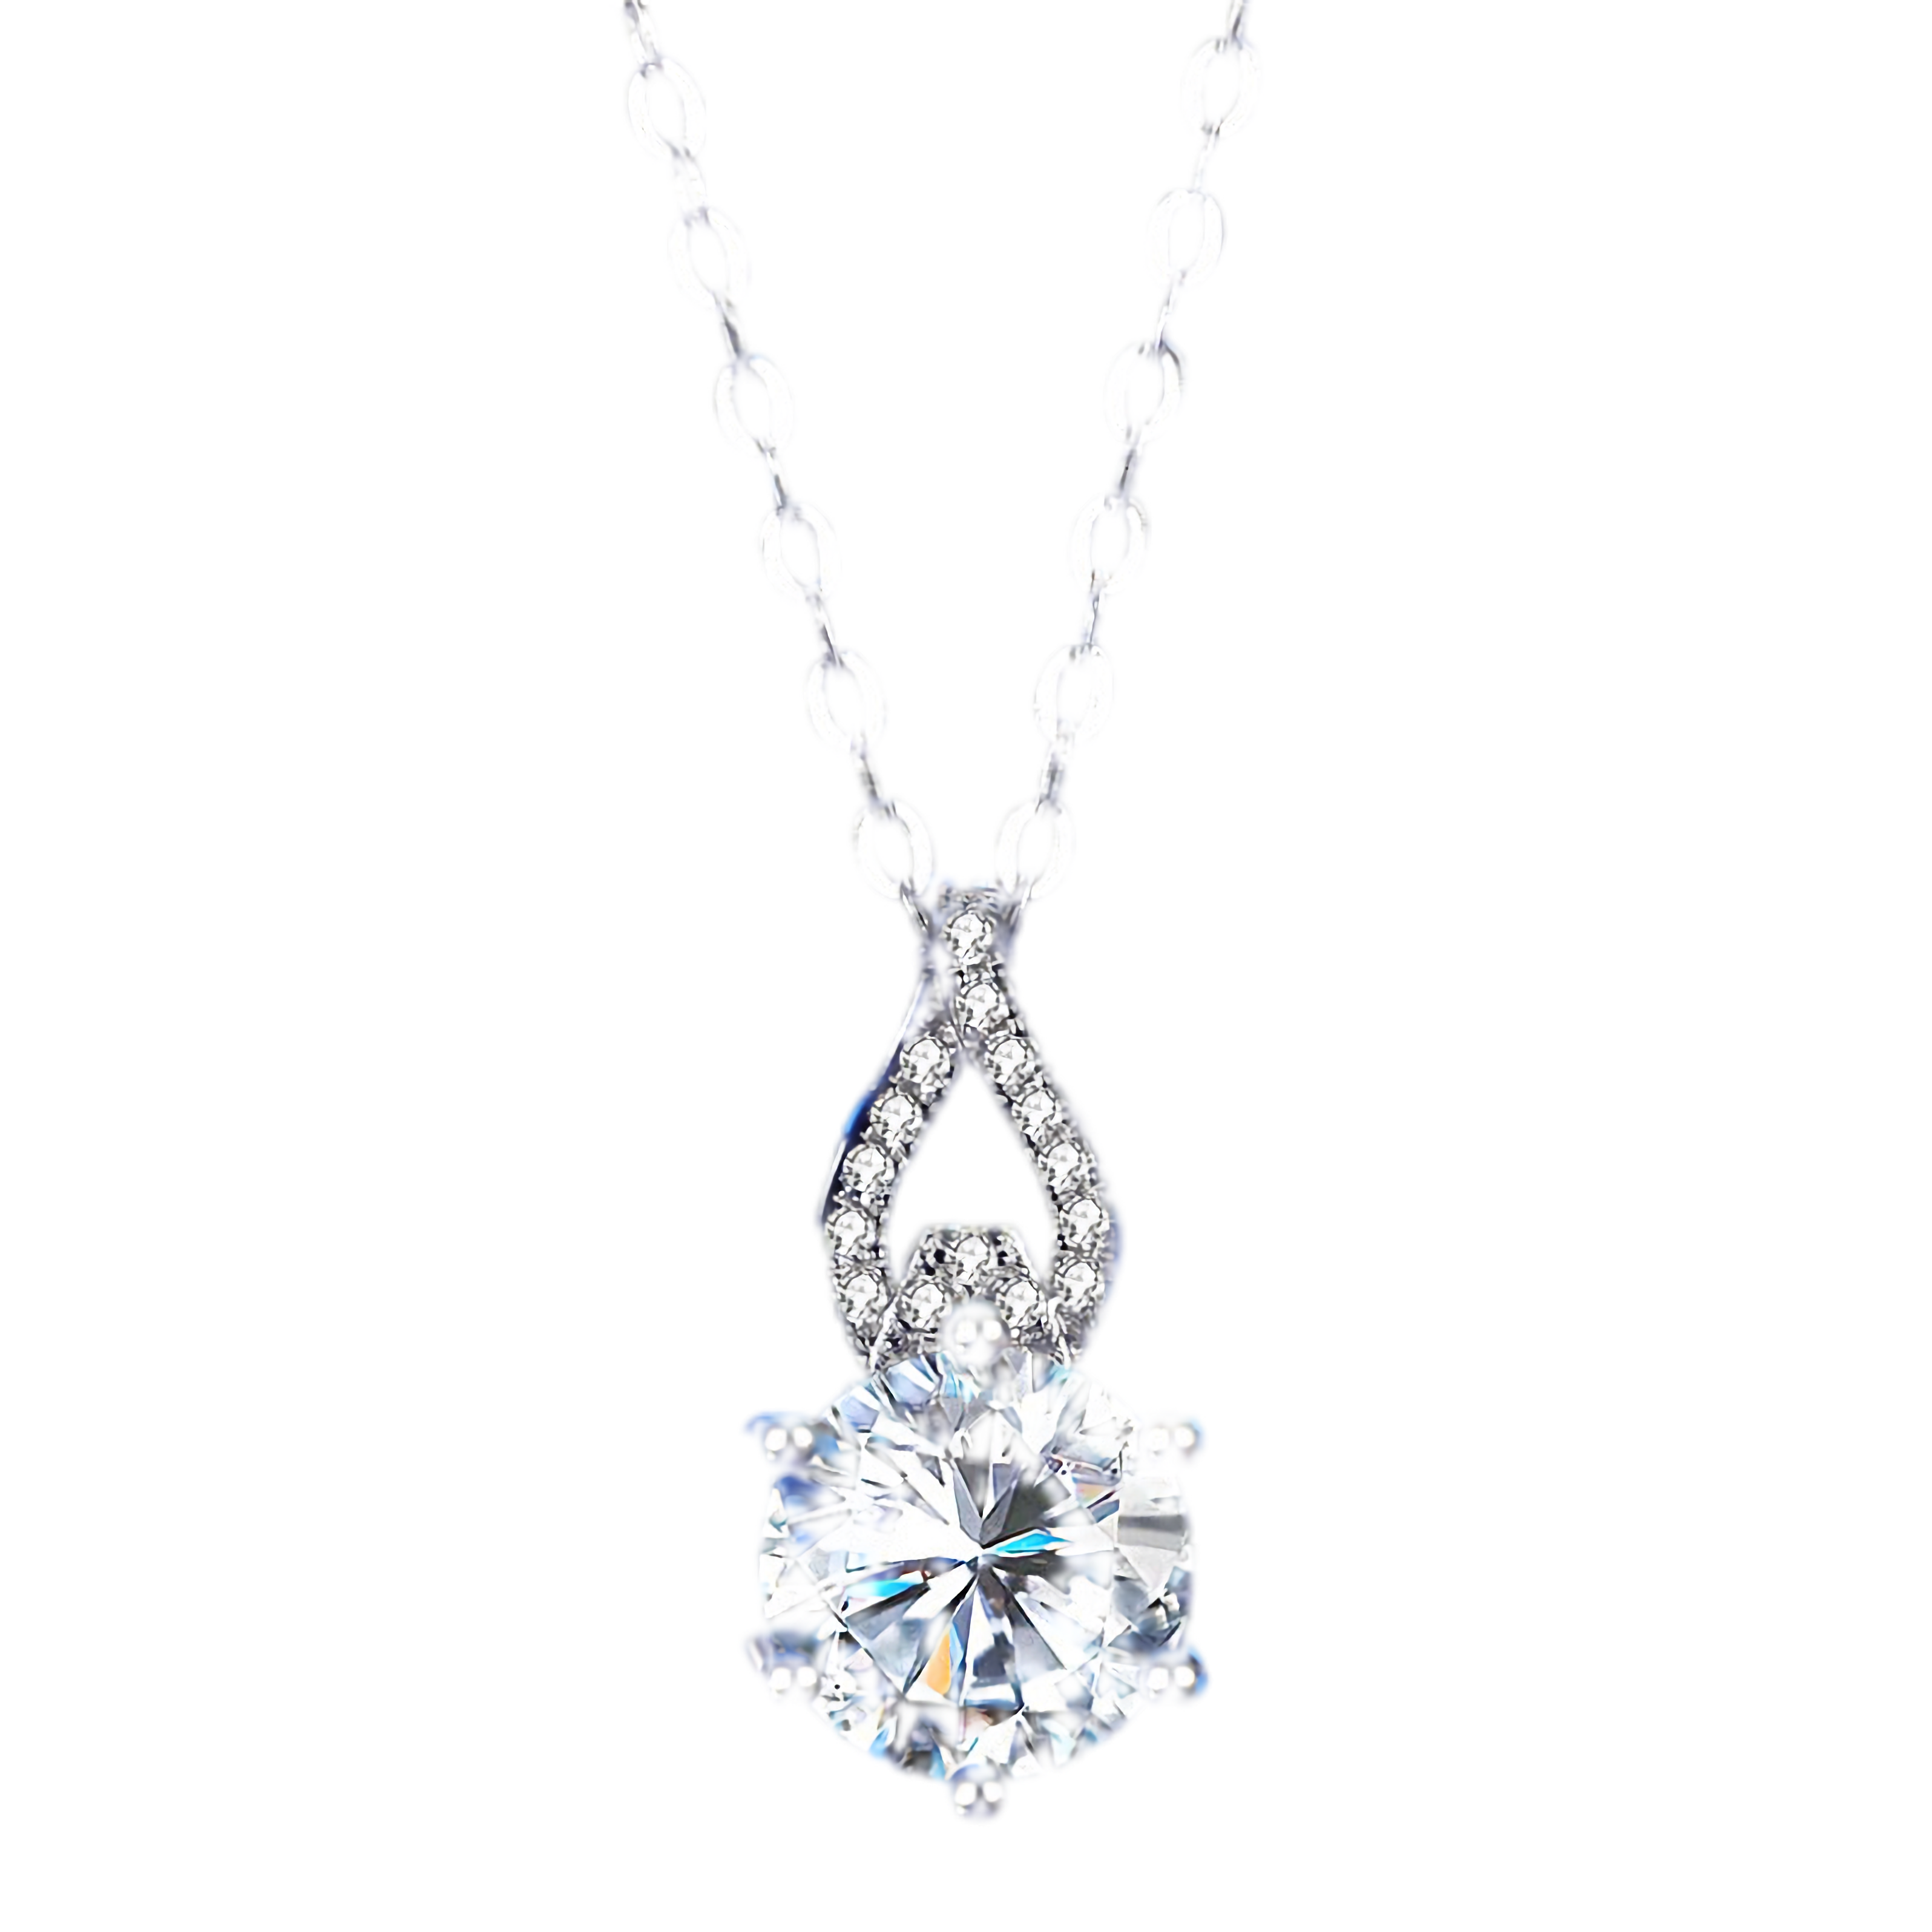 J1287 1 or 2 Carat Moissanite Pendant Necklace, Free Chain, Sterling Silver With 18K White Gold Plating, Handmade Engagement Gift  For Women Her